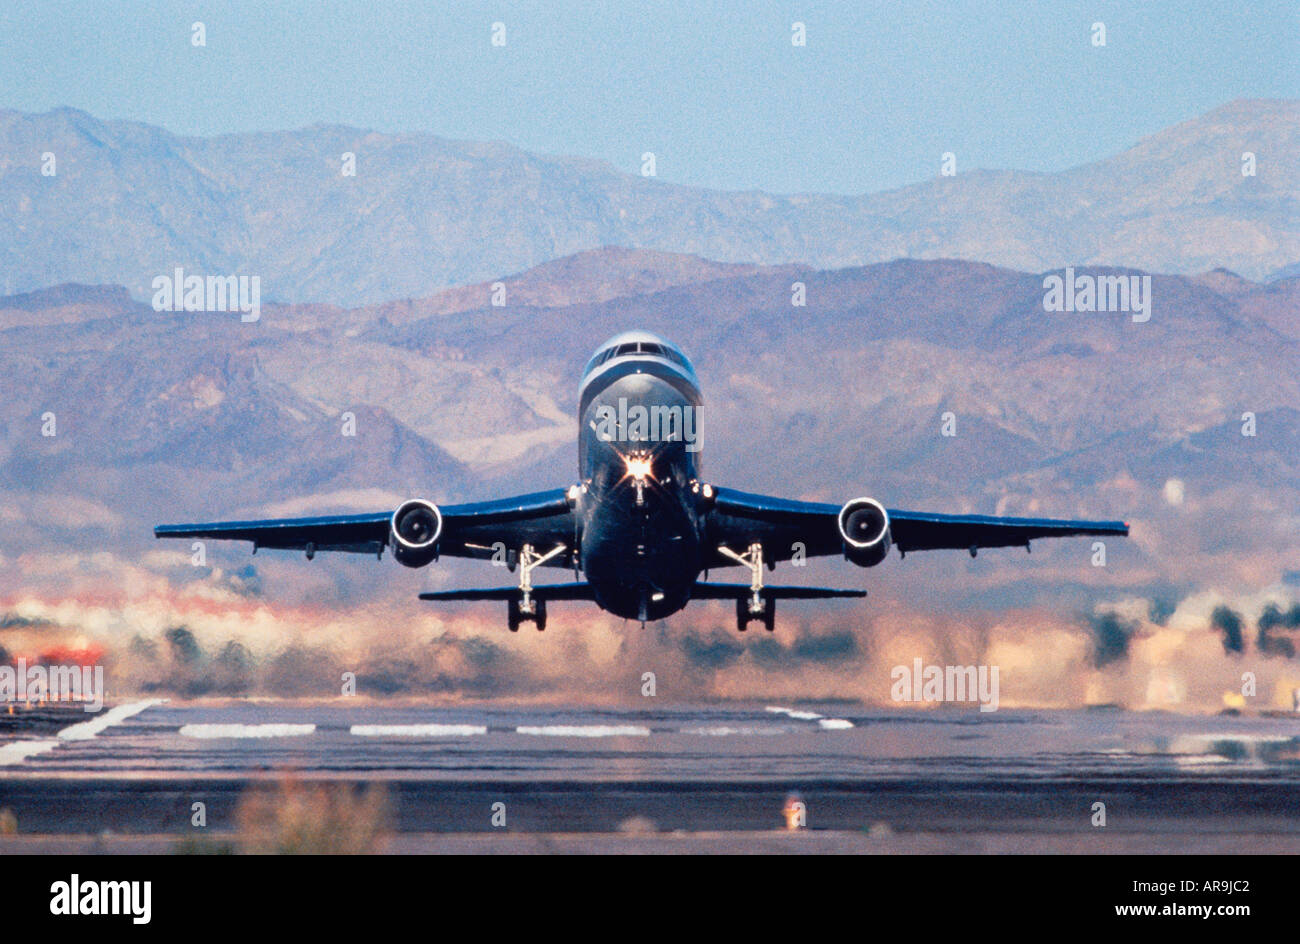 widebody jumbo jet airliner taking off just airborne above runway head on view with hills mountains in background Stock Photo